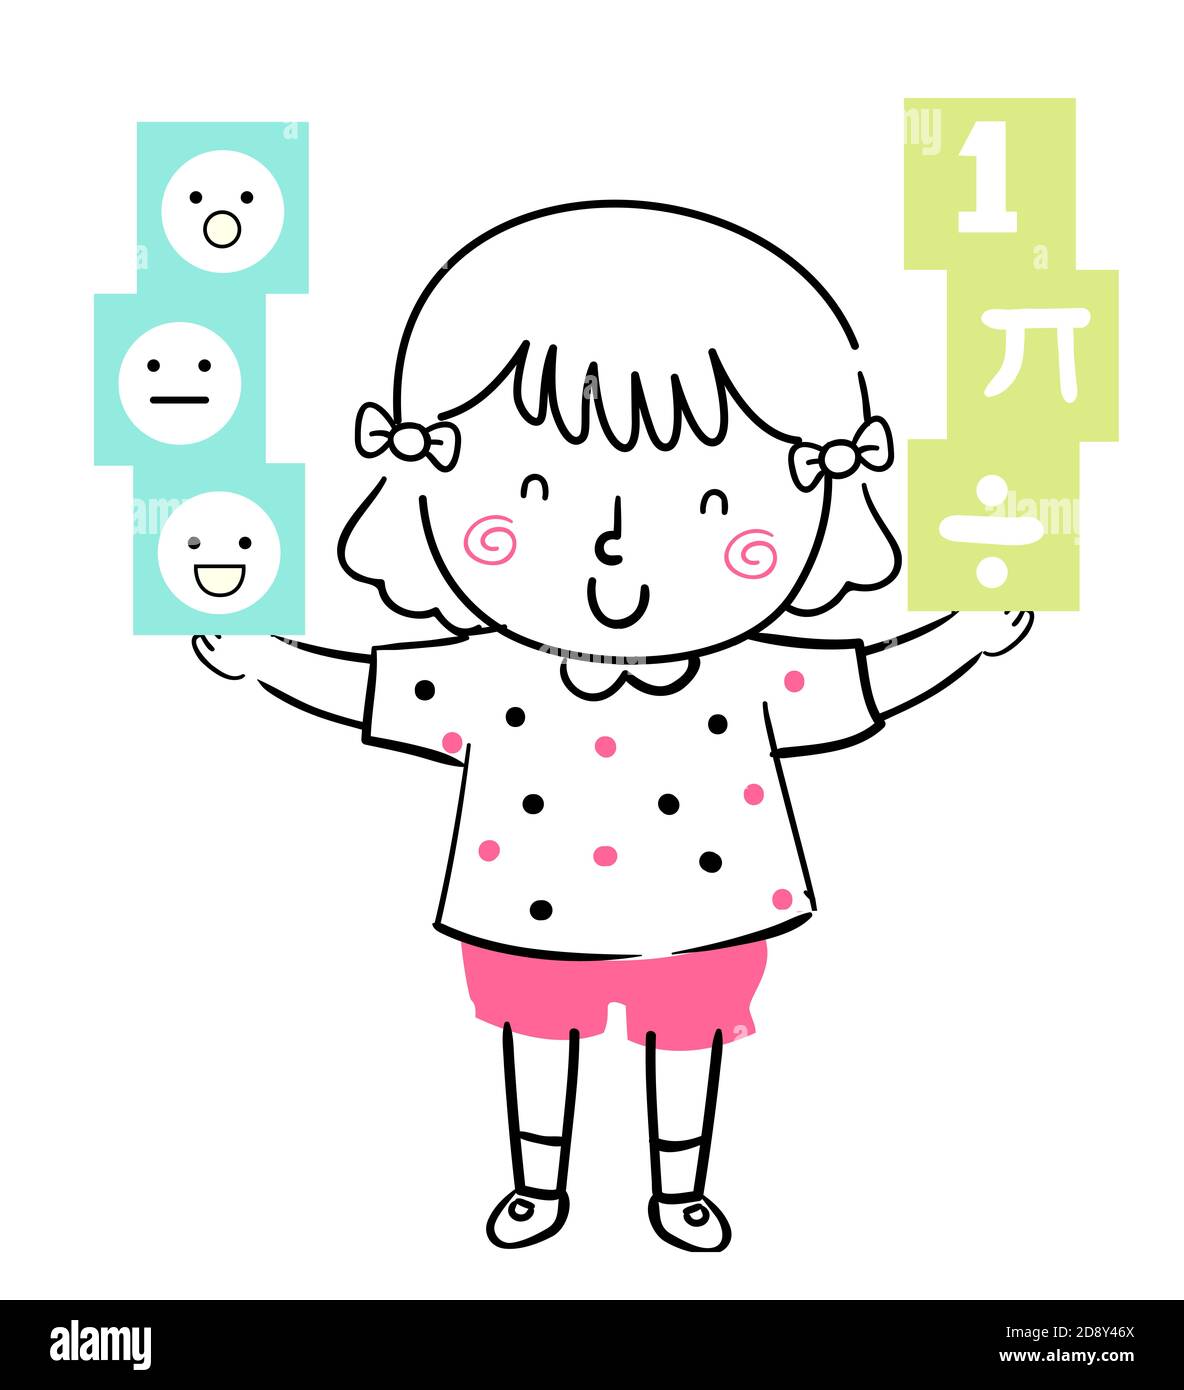 Illustration of a Kid Girl Holding and Balancing EQ and IQ Elements on Her Hands Stock Photo